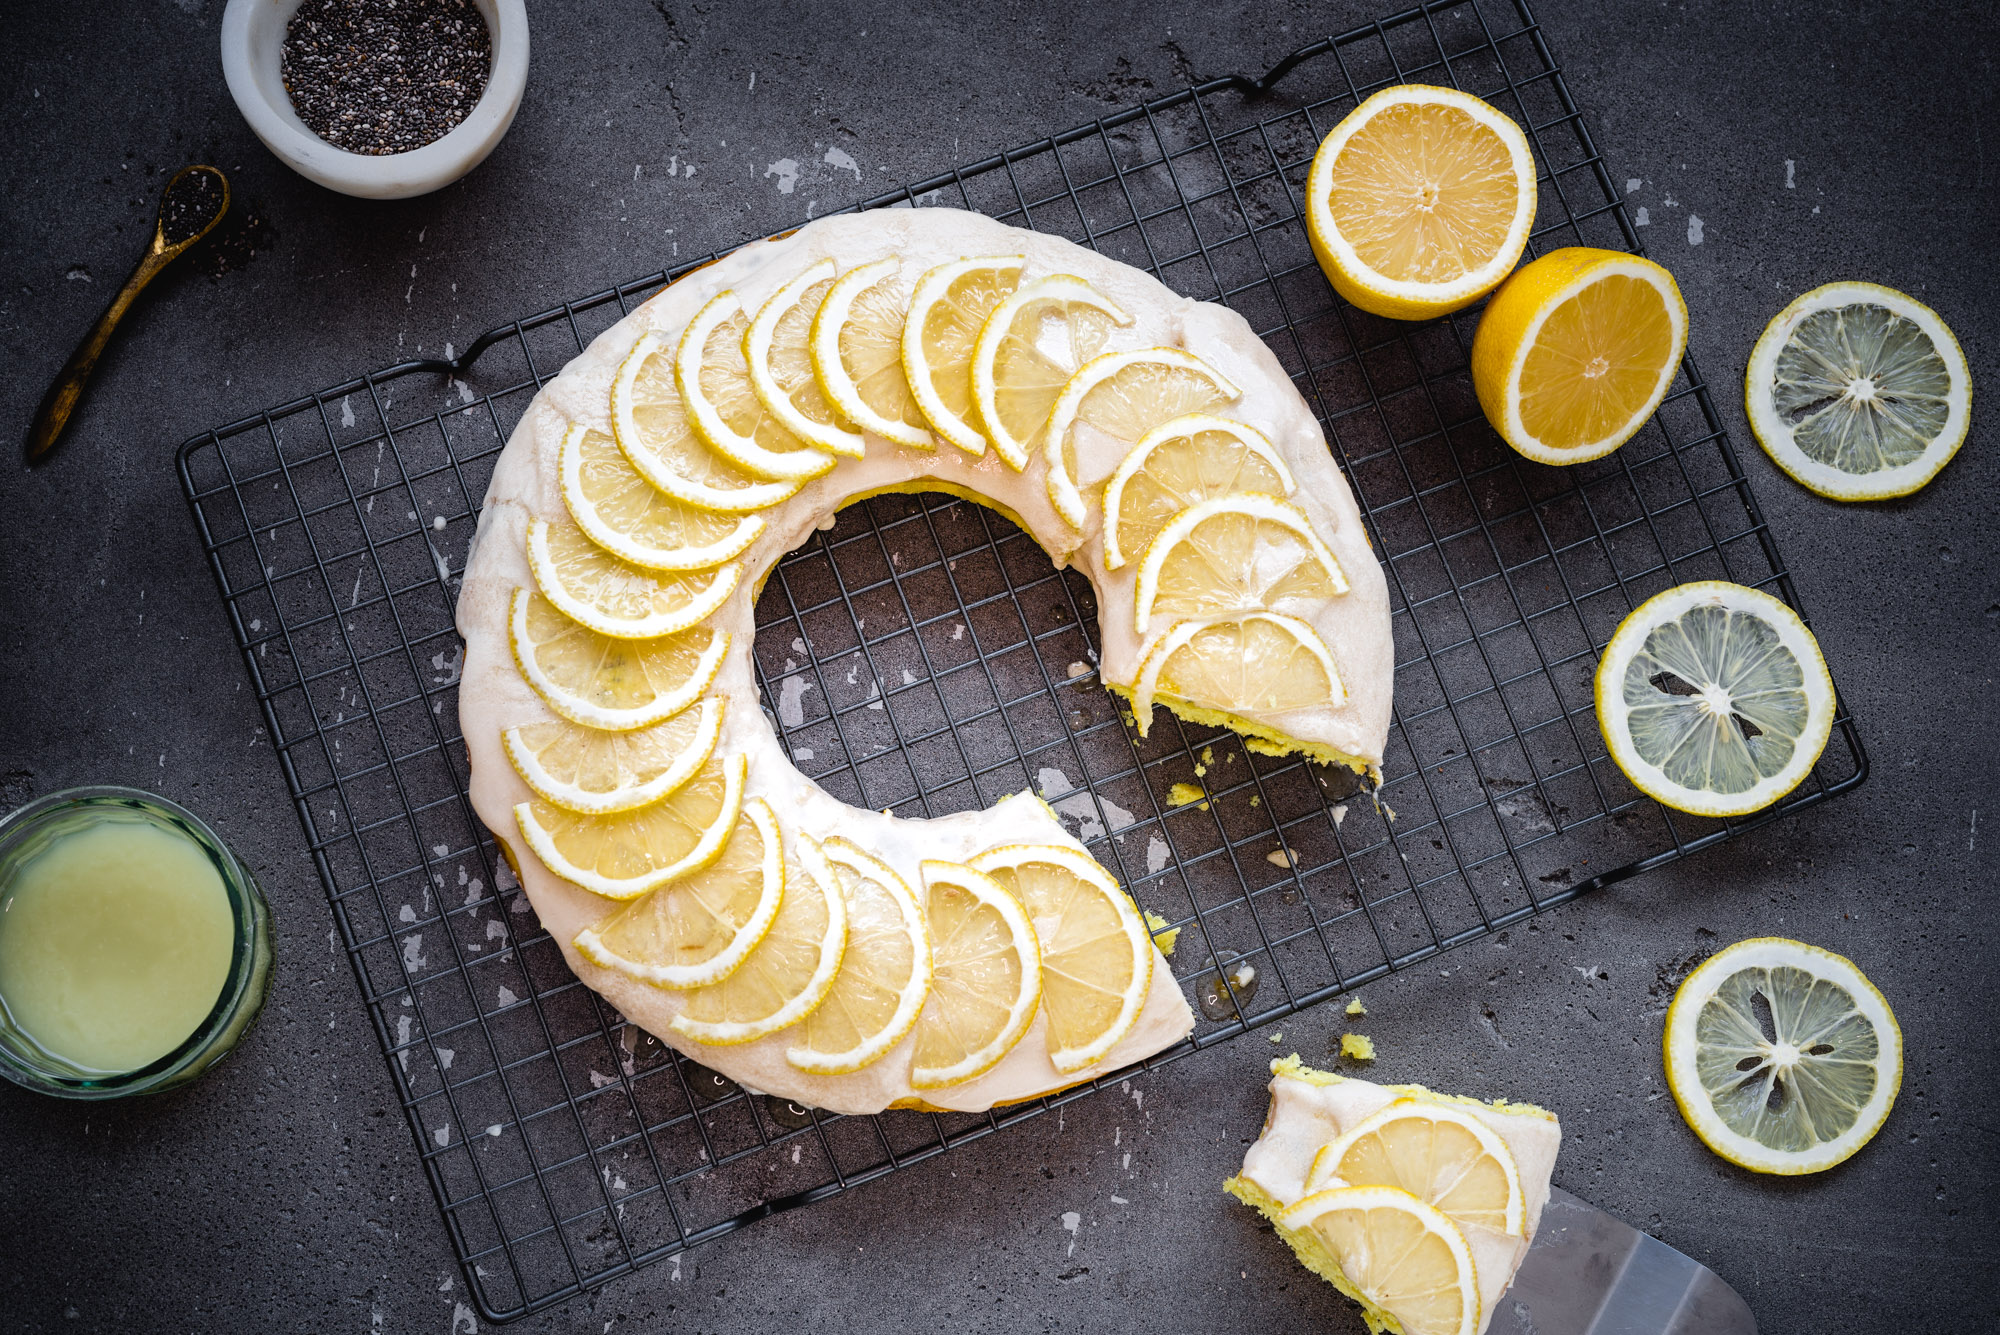 Jeff On The Road - Photography - Food Styling - IKEA Lemon Cake - All photos are under Copyright  © 2017 Jeff Frenette Photography / dezjeff. To use the photos, please contact me at dezjeff@me.com.